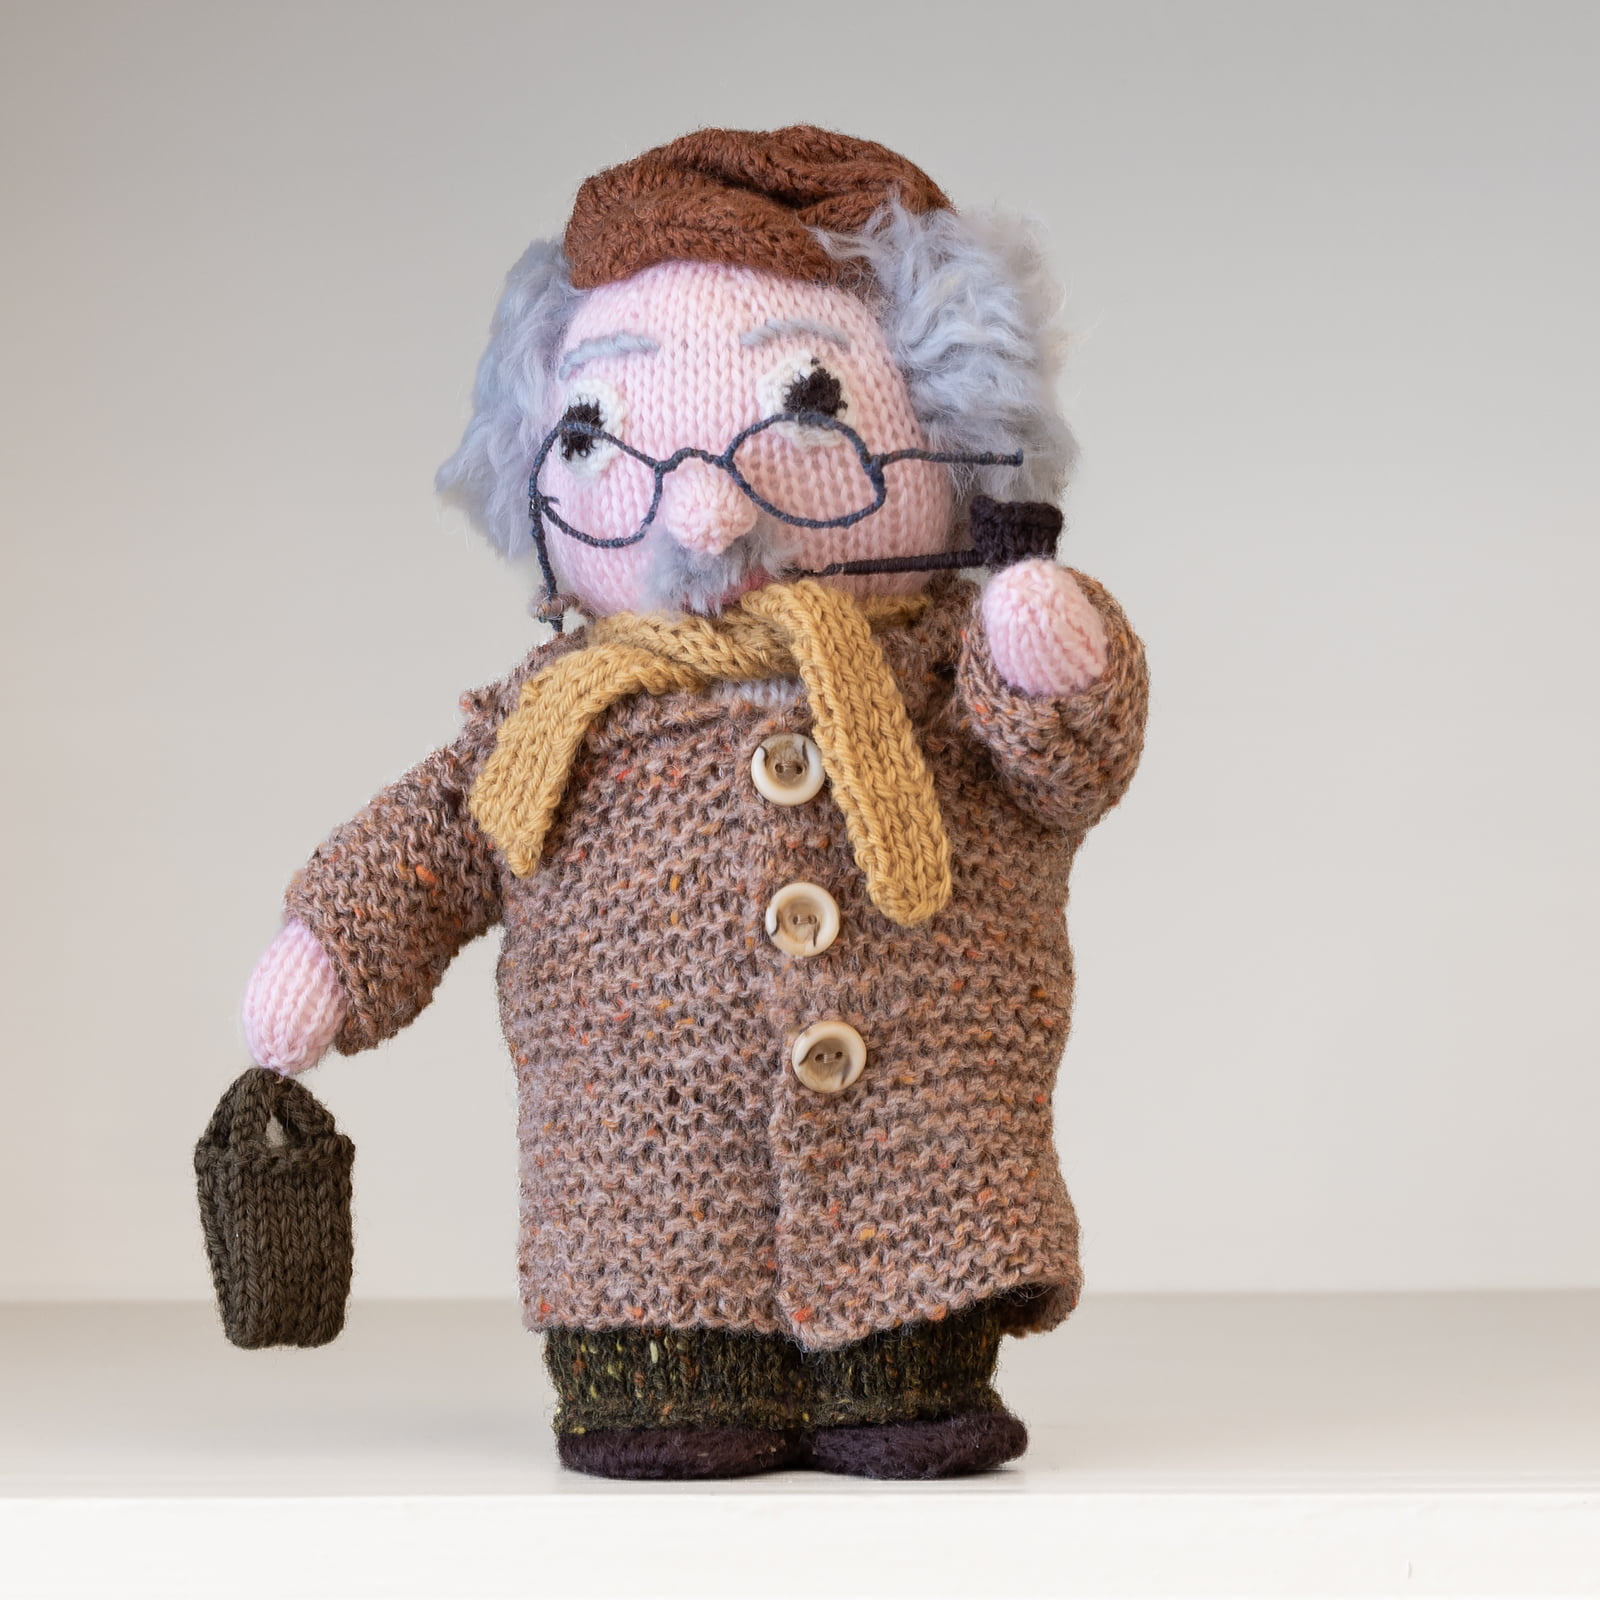 Hand made knitted Grandad toy